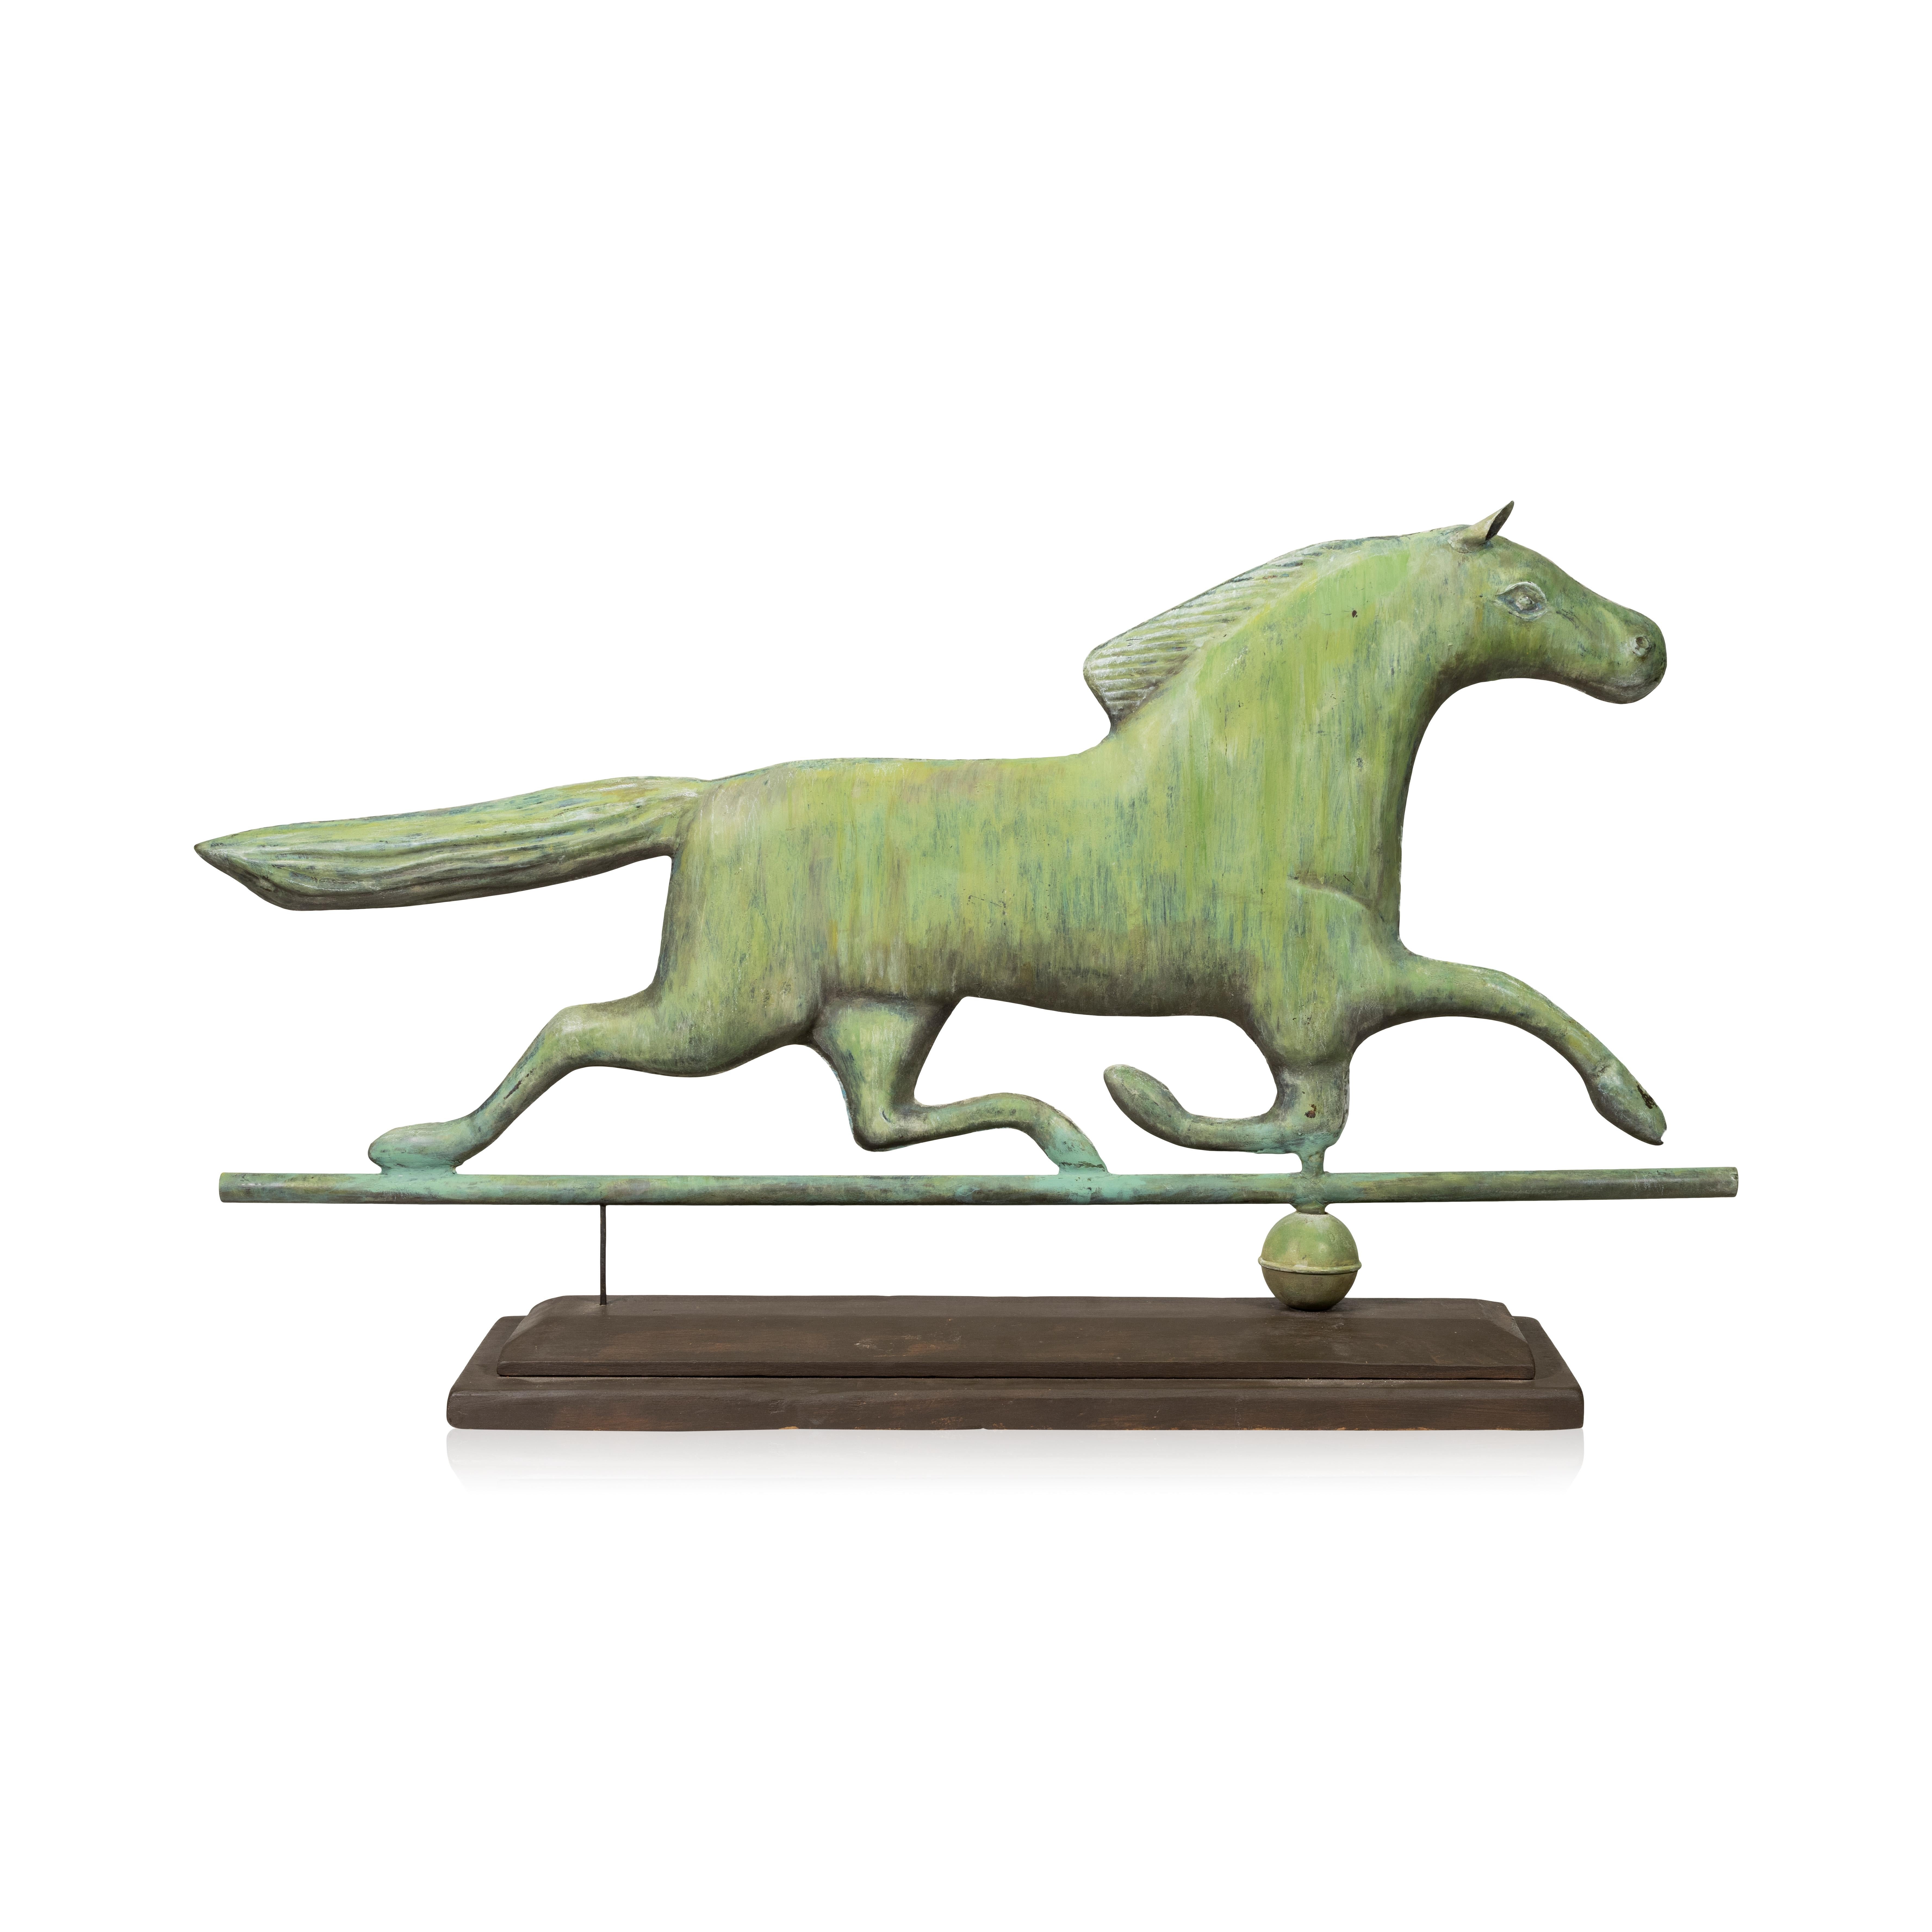 Full bodied 3D running horse with applied verdigris weather vane on wood base. Mid 20th Century. 18